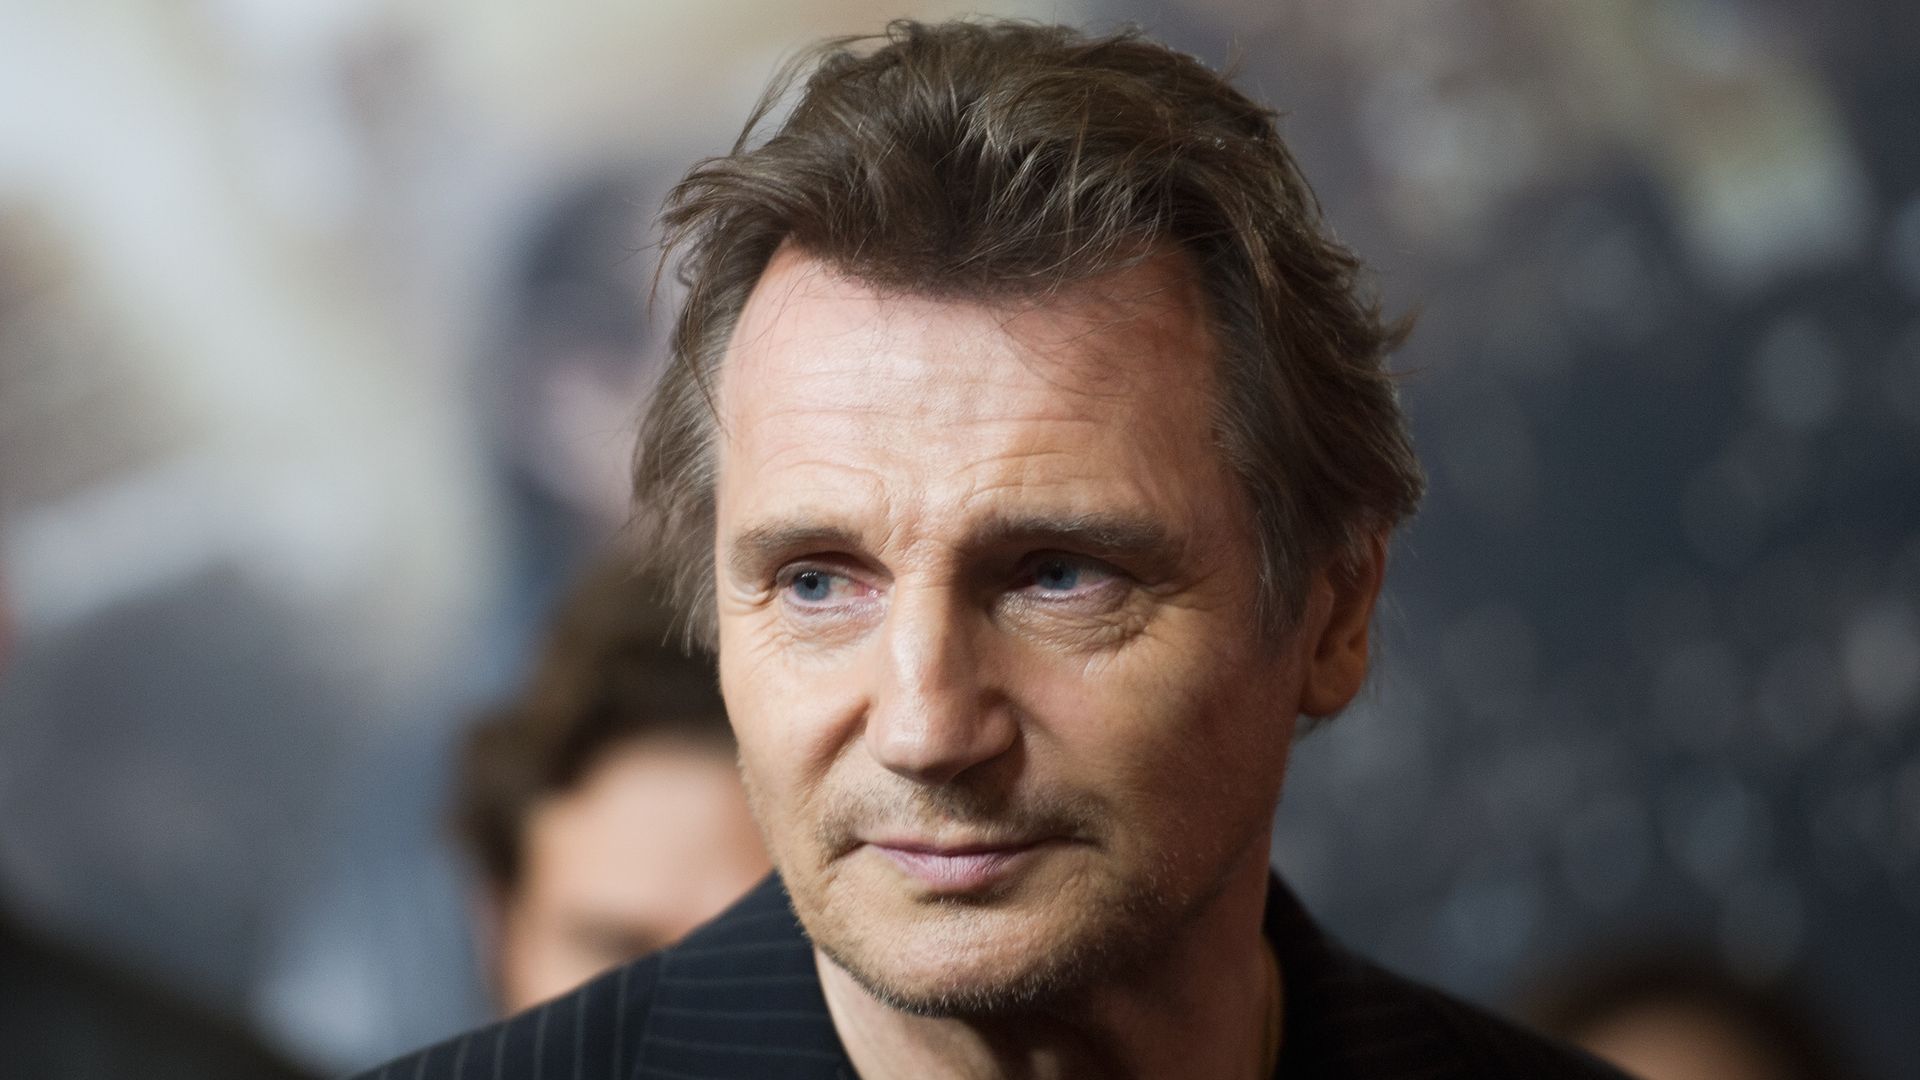 Liam Neeson attends the premiere of the film '96 Hours - Taken 3' at Zoo Palast on December 16, 2014 in Berlin, Germany